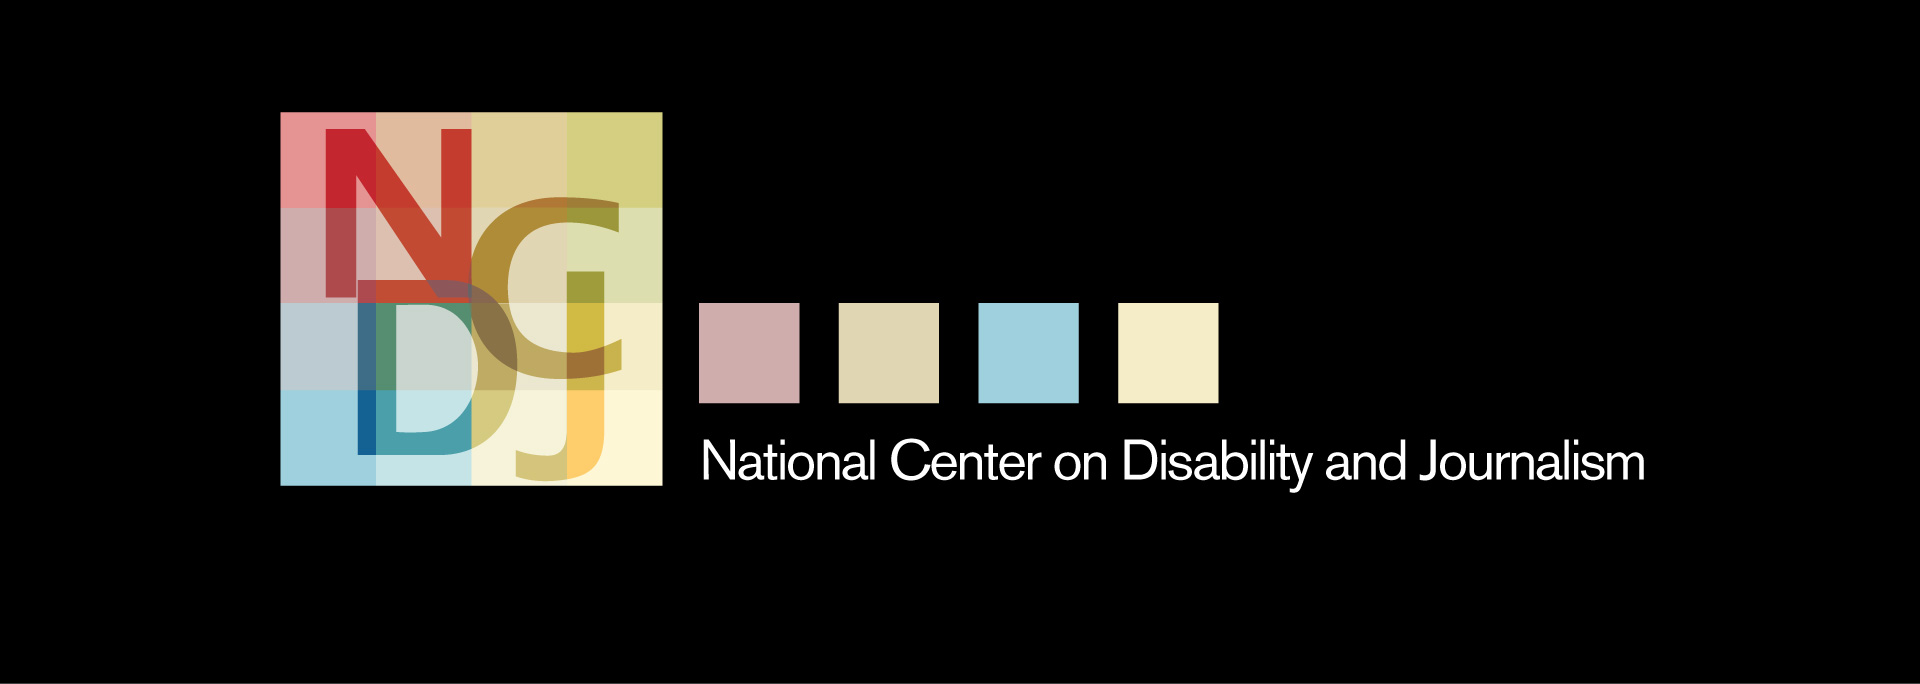 The National Center for Disability and Journalism has announced the winners of the 2021 Katherine Schneider Journalism Award for Excellence in Reporting on Disability.